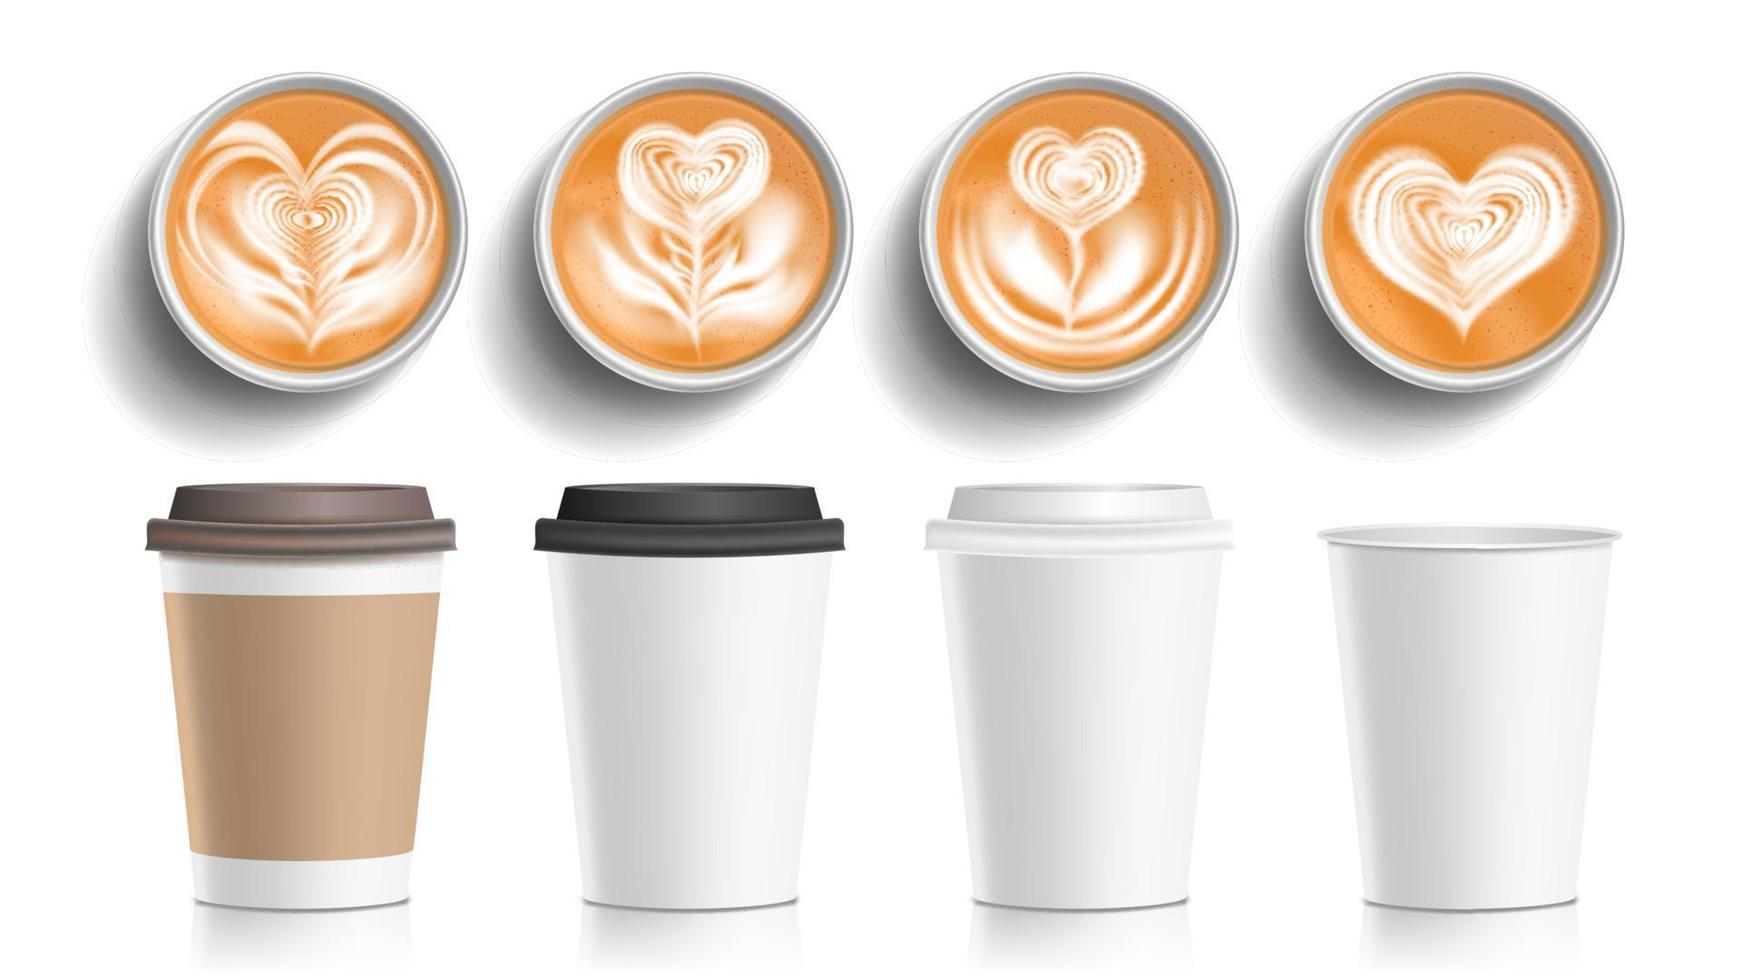 Coffee Cups Art Top View Vector. Plastic, Paper White Empty Fast Food Take Out Coffee Menu Mugs. Various Ocher Paper Cups. Breakfast Beverage. Realistic Isolated Illustration vector